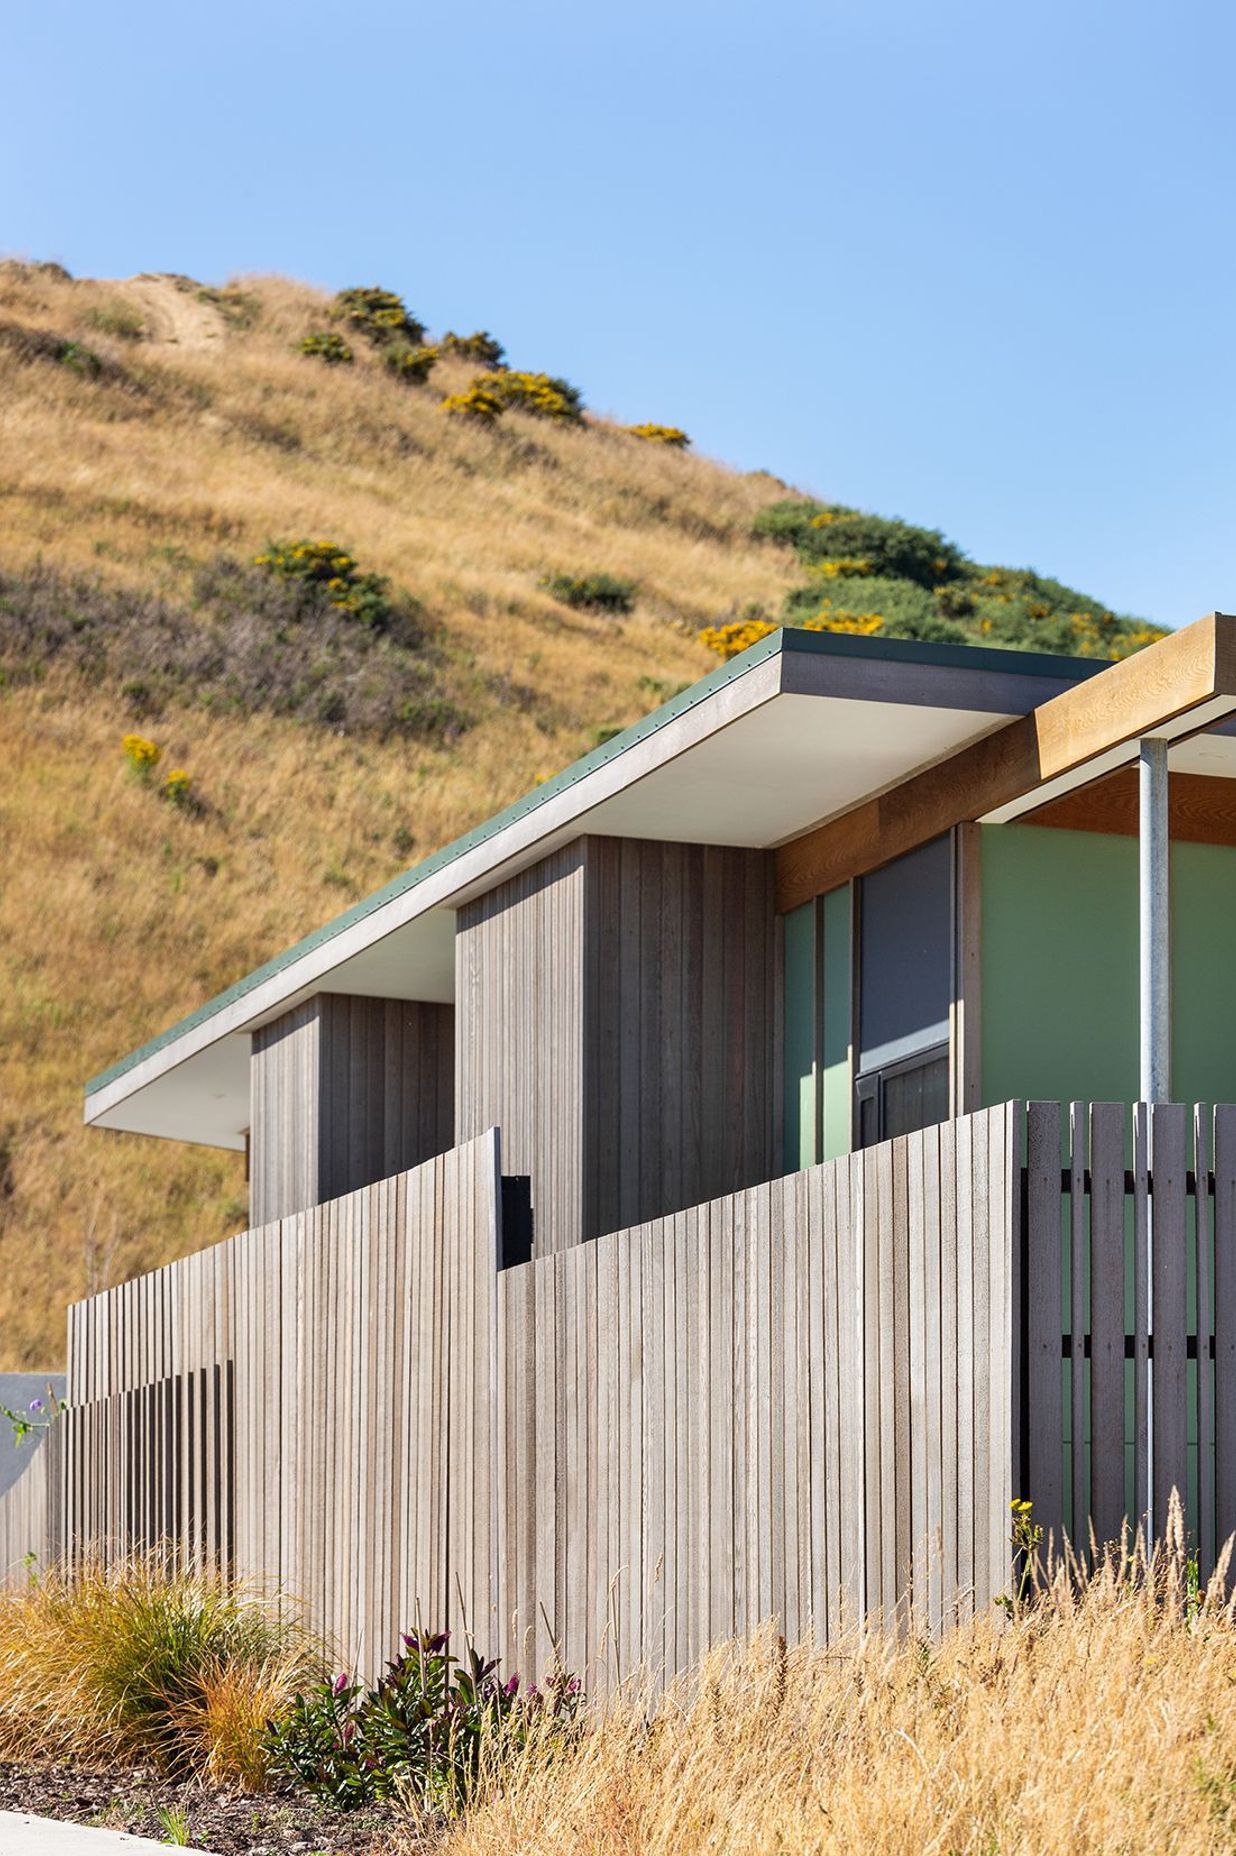 Vertical cedar cladding of varying widths mimics the earthy tones of the surrounding brush while muted green accents complement the natural setting.